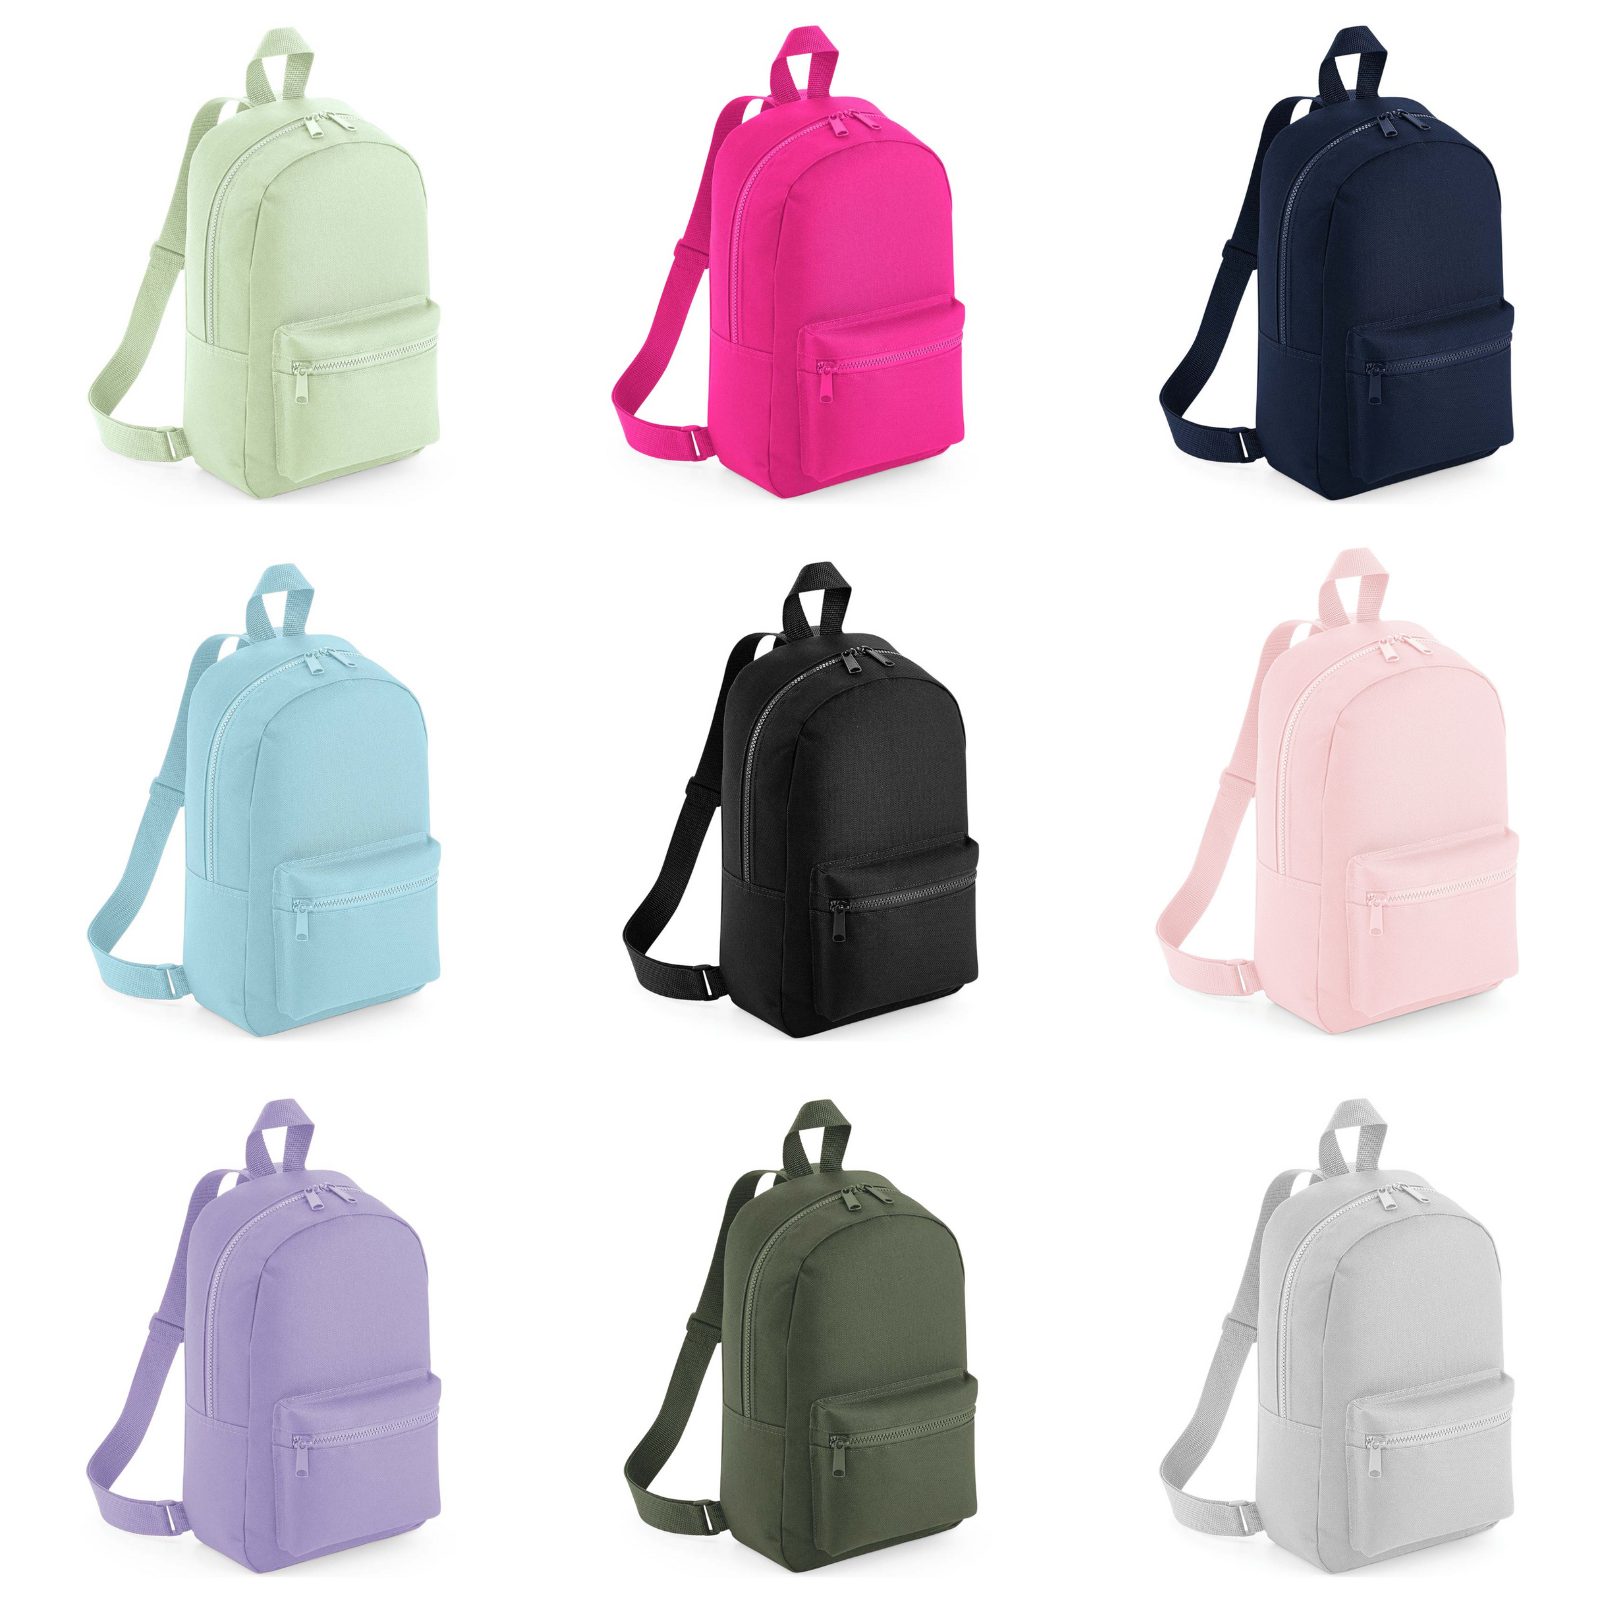 image showing the nine different coloured bags available for our personalised nusery bag with a dinosaur initial. The bag is available in pistachio, fuchsia pink, navy blue, powder blue, black, powder pink, lavender, olive green and light grey, all of which can be embroidered with an initial made up of mini dinosaurs, eggs and footprints.